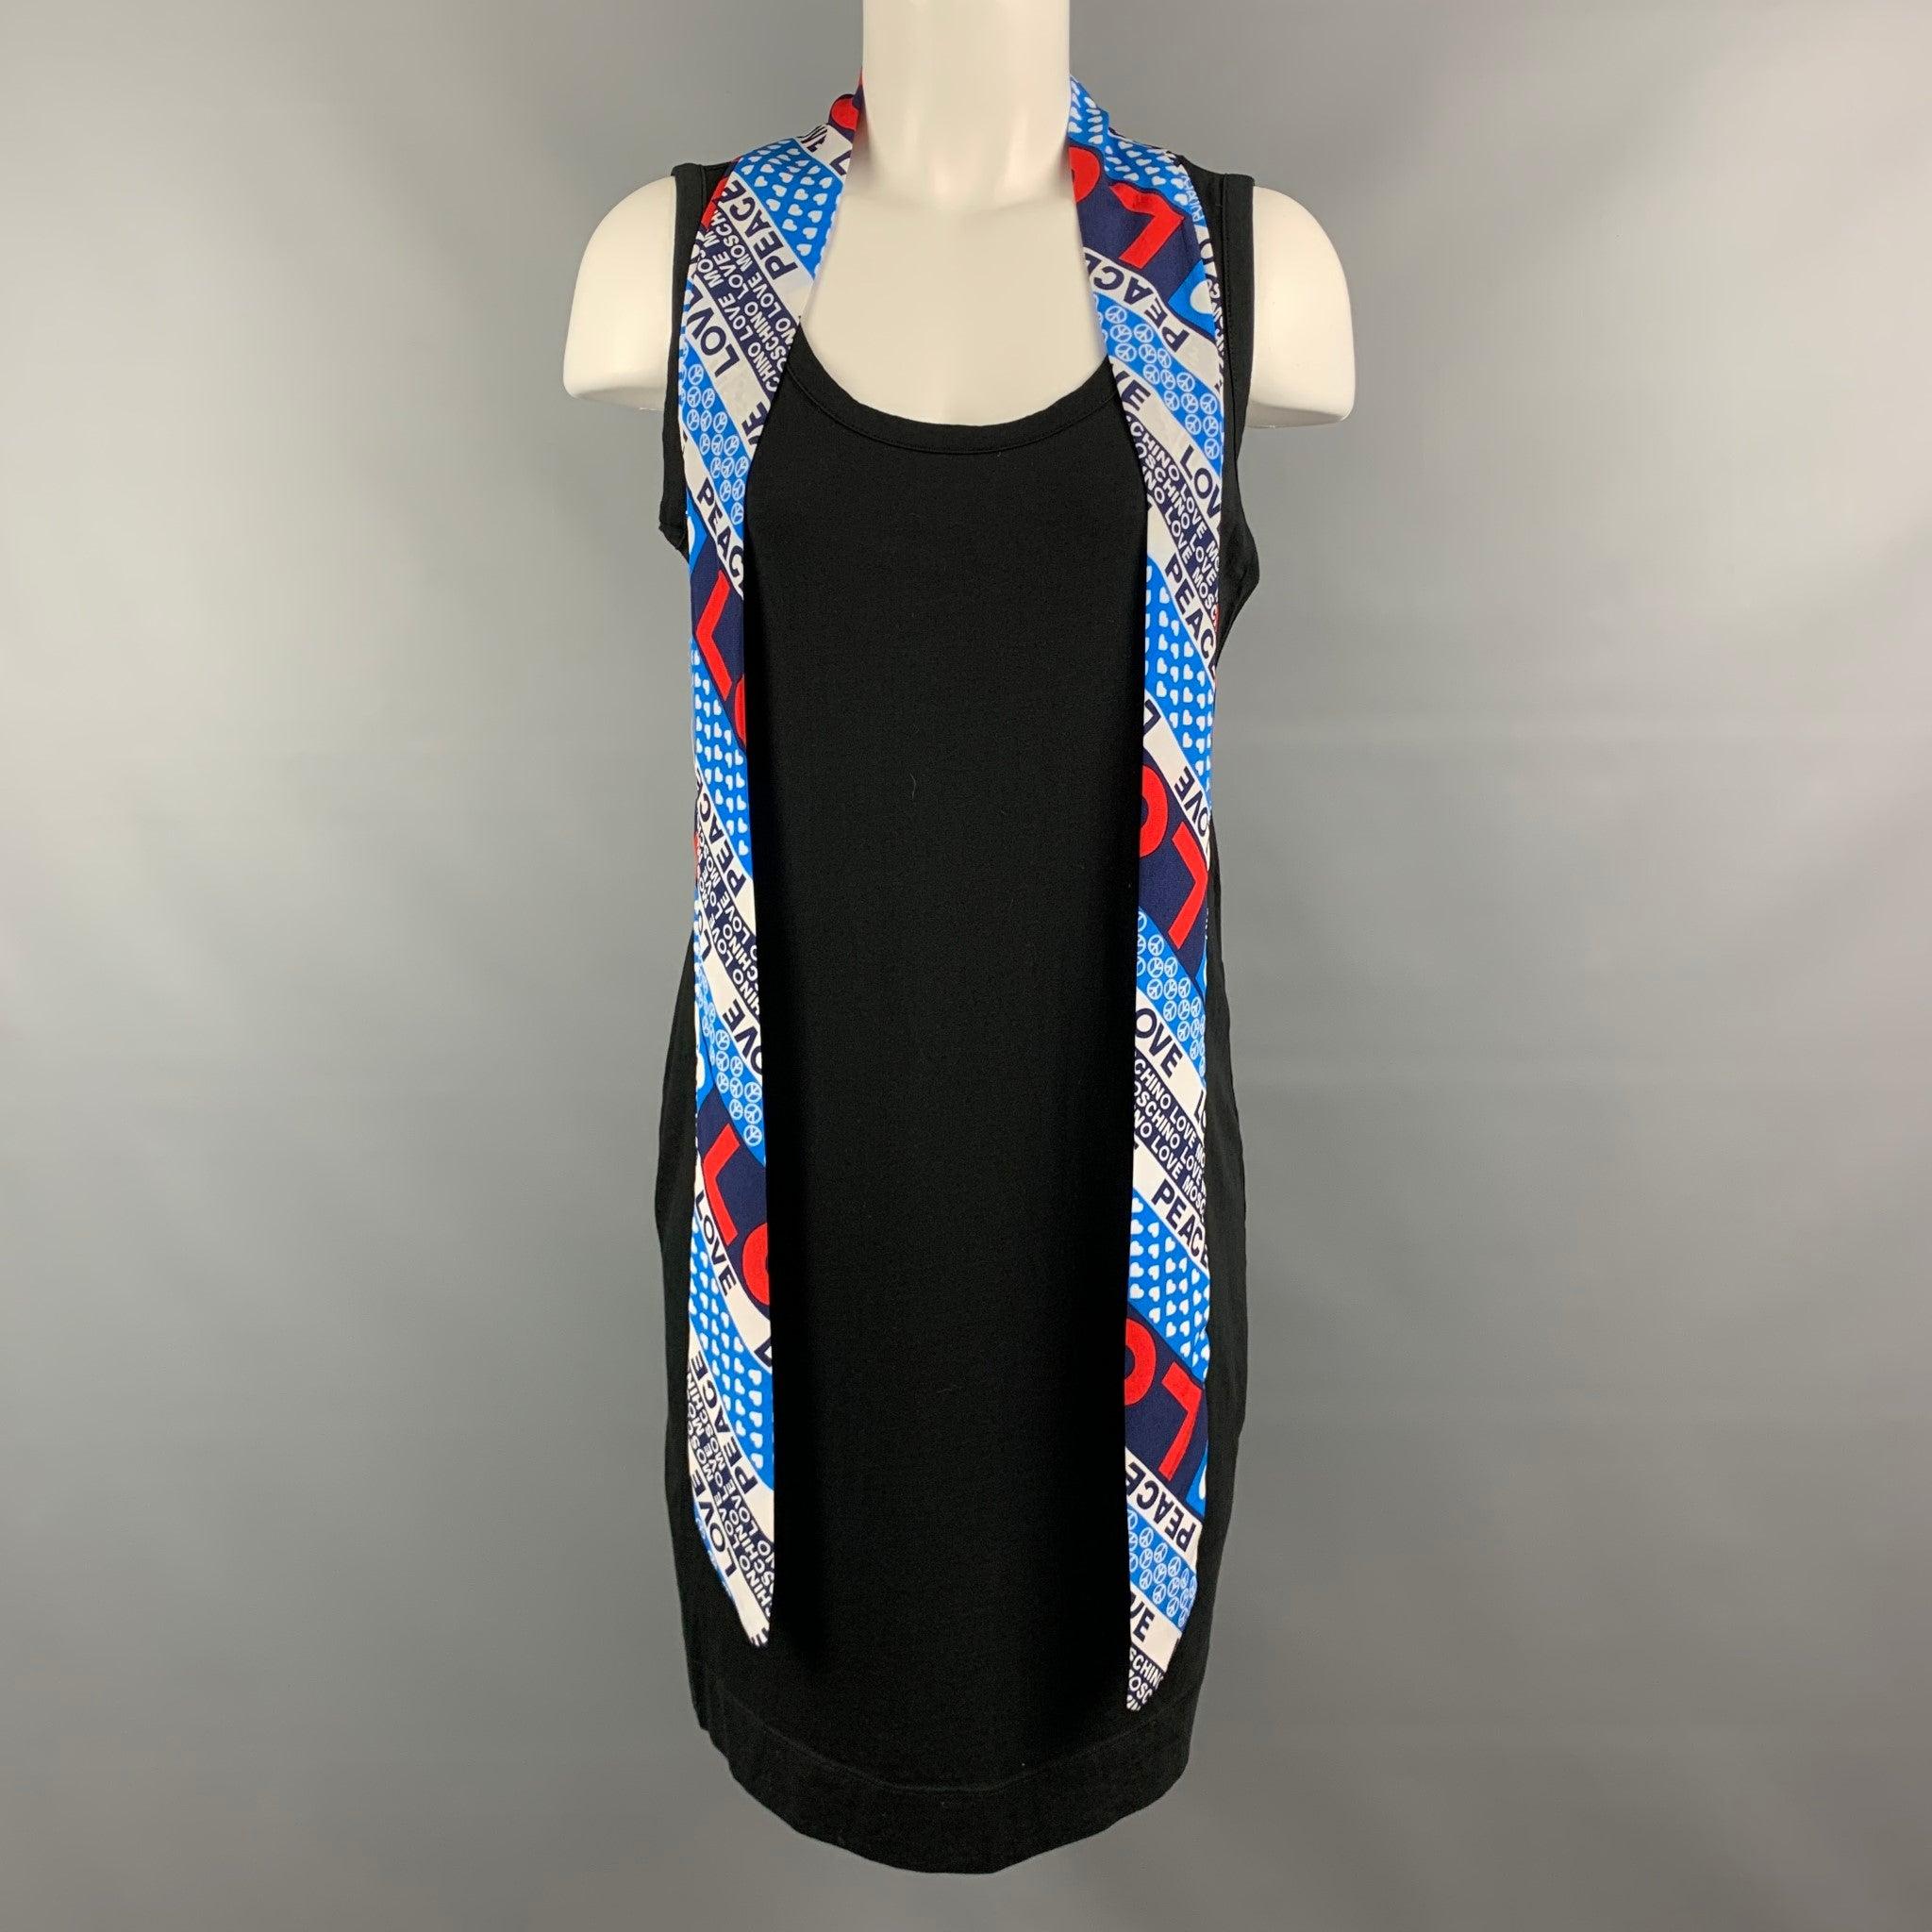 LOVE MOSCHINO dress comes in a solid black cotton / elastane material, with a round neck, sleeveless, and a blue, red and white 